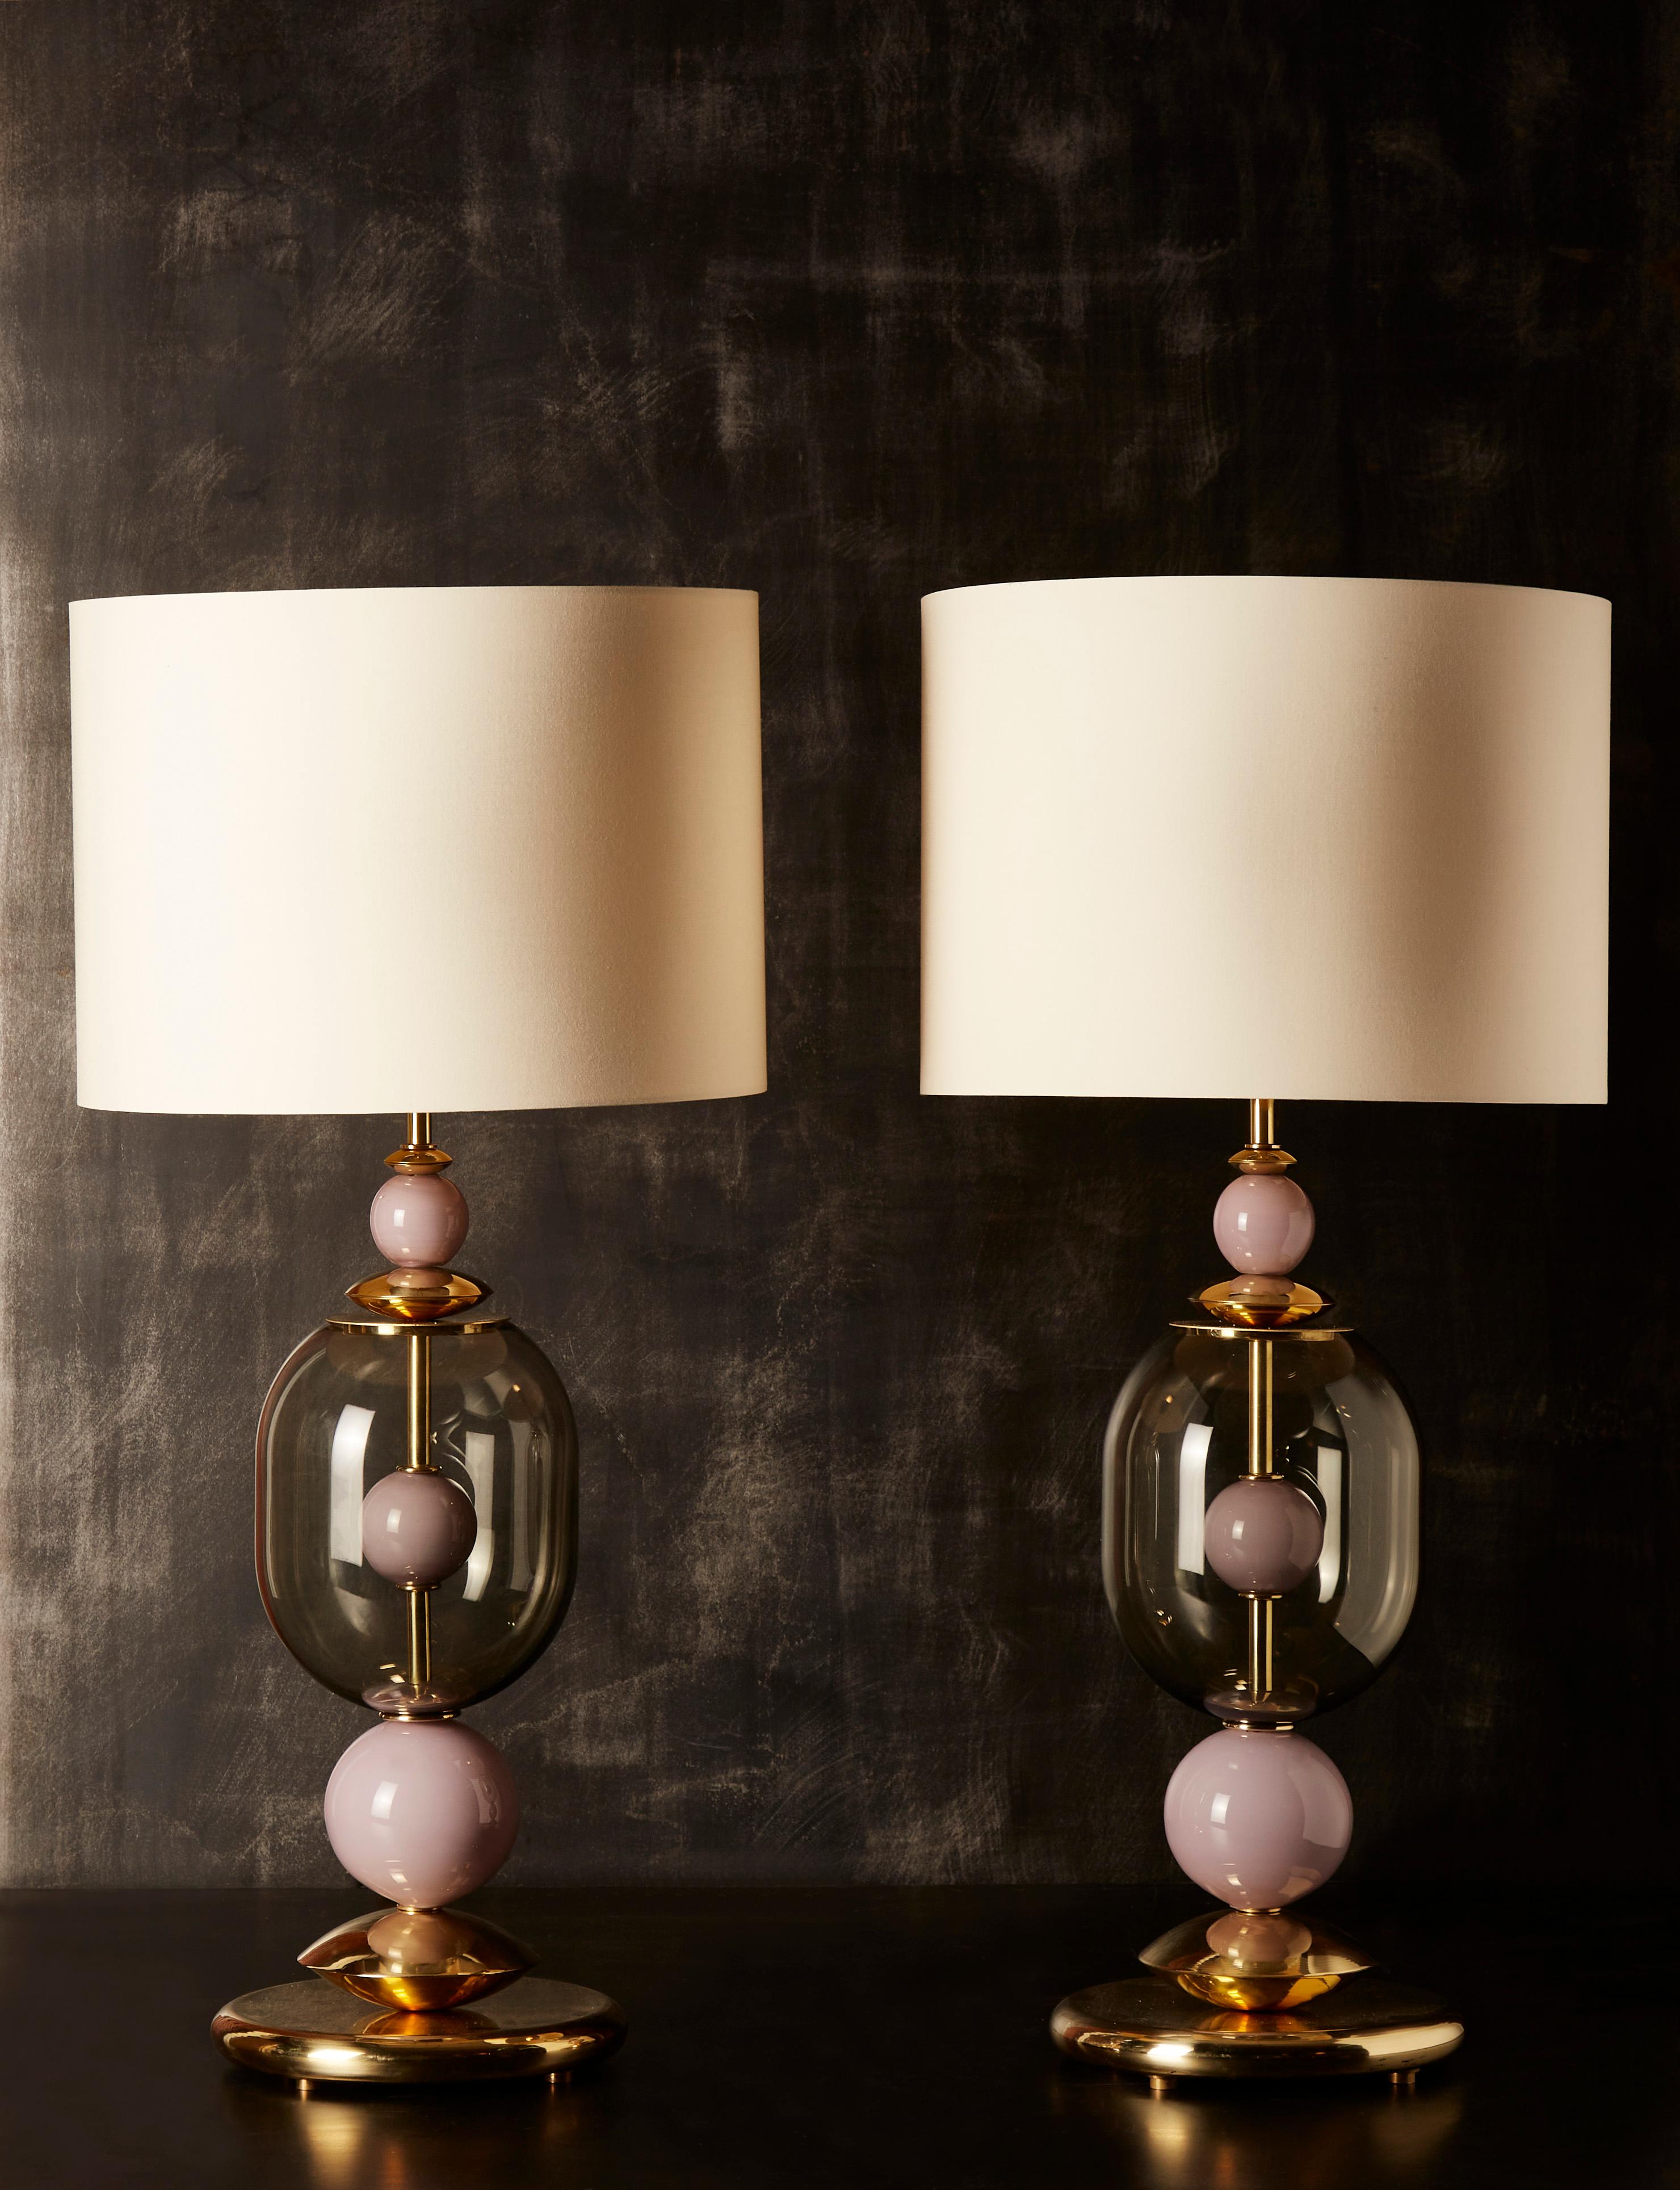 Pair of exquisite table lamps made of brass foot and central stem, brass inserts and dust pink Murano glass balls.